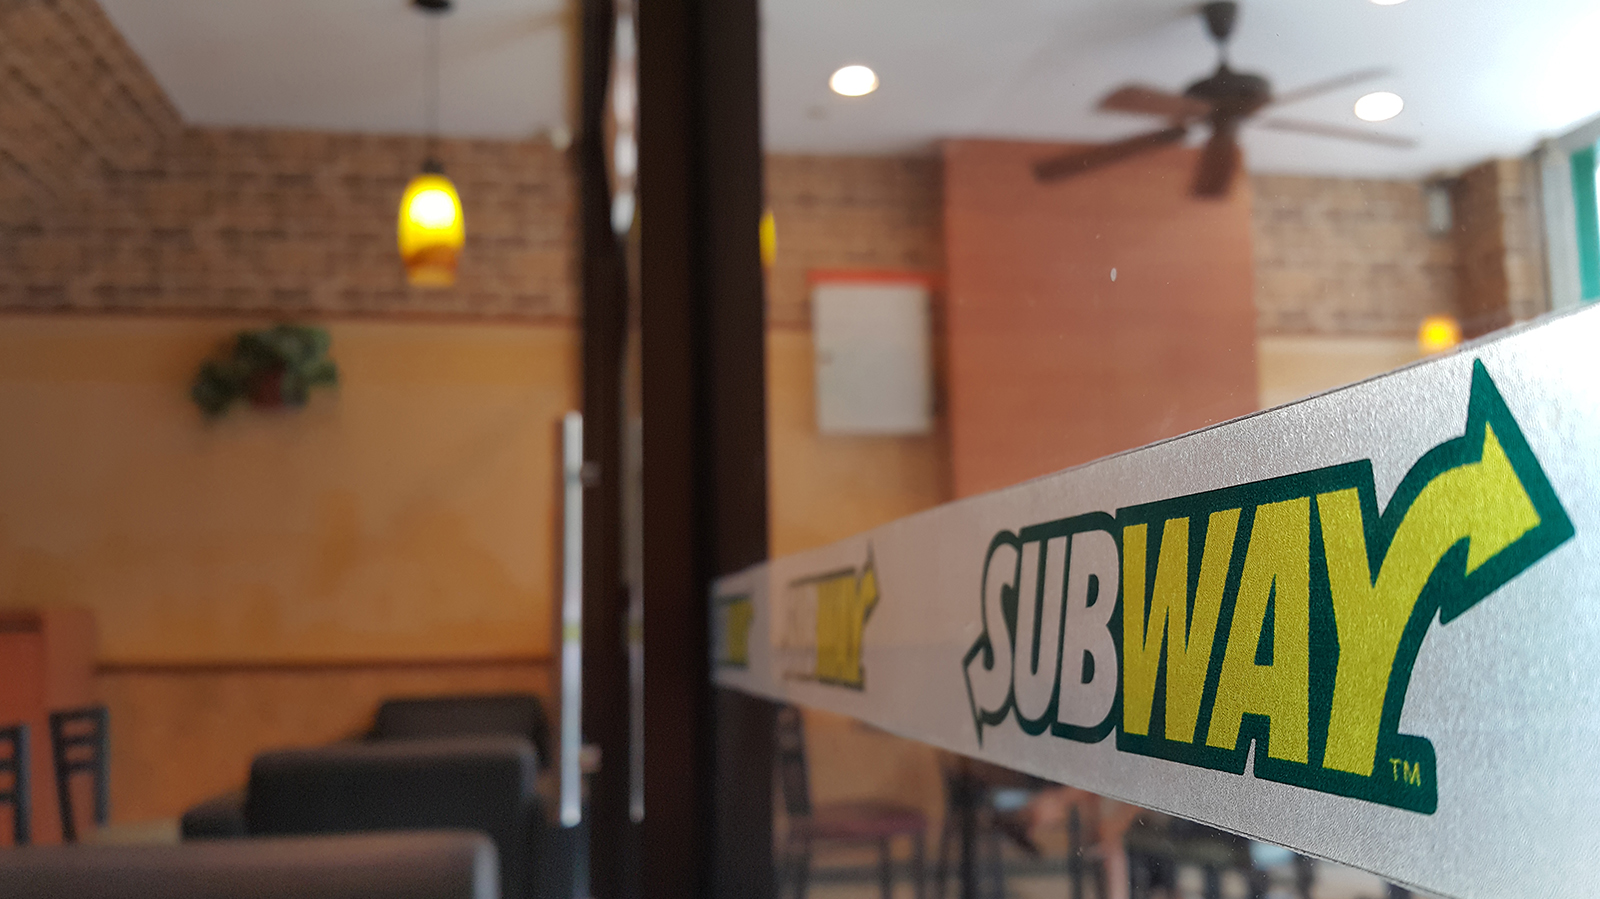 Suddenly, Subway is life in Singapore. Because pork